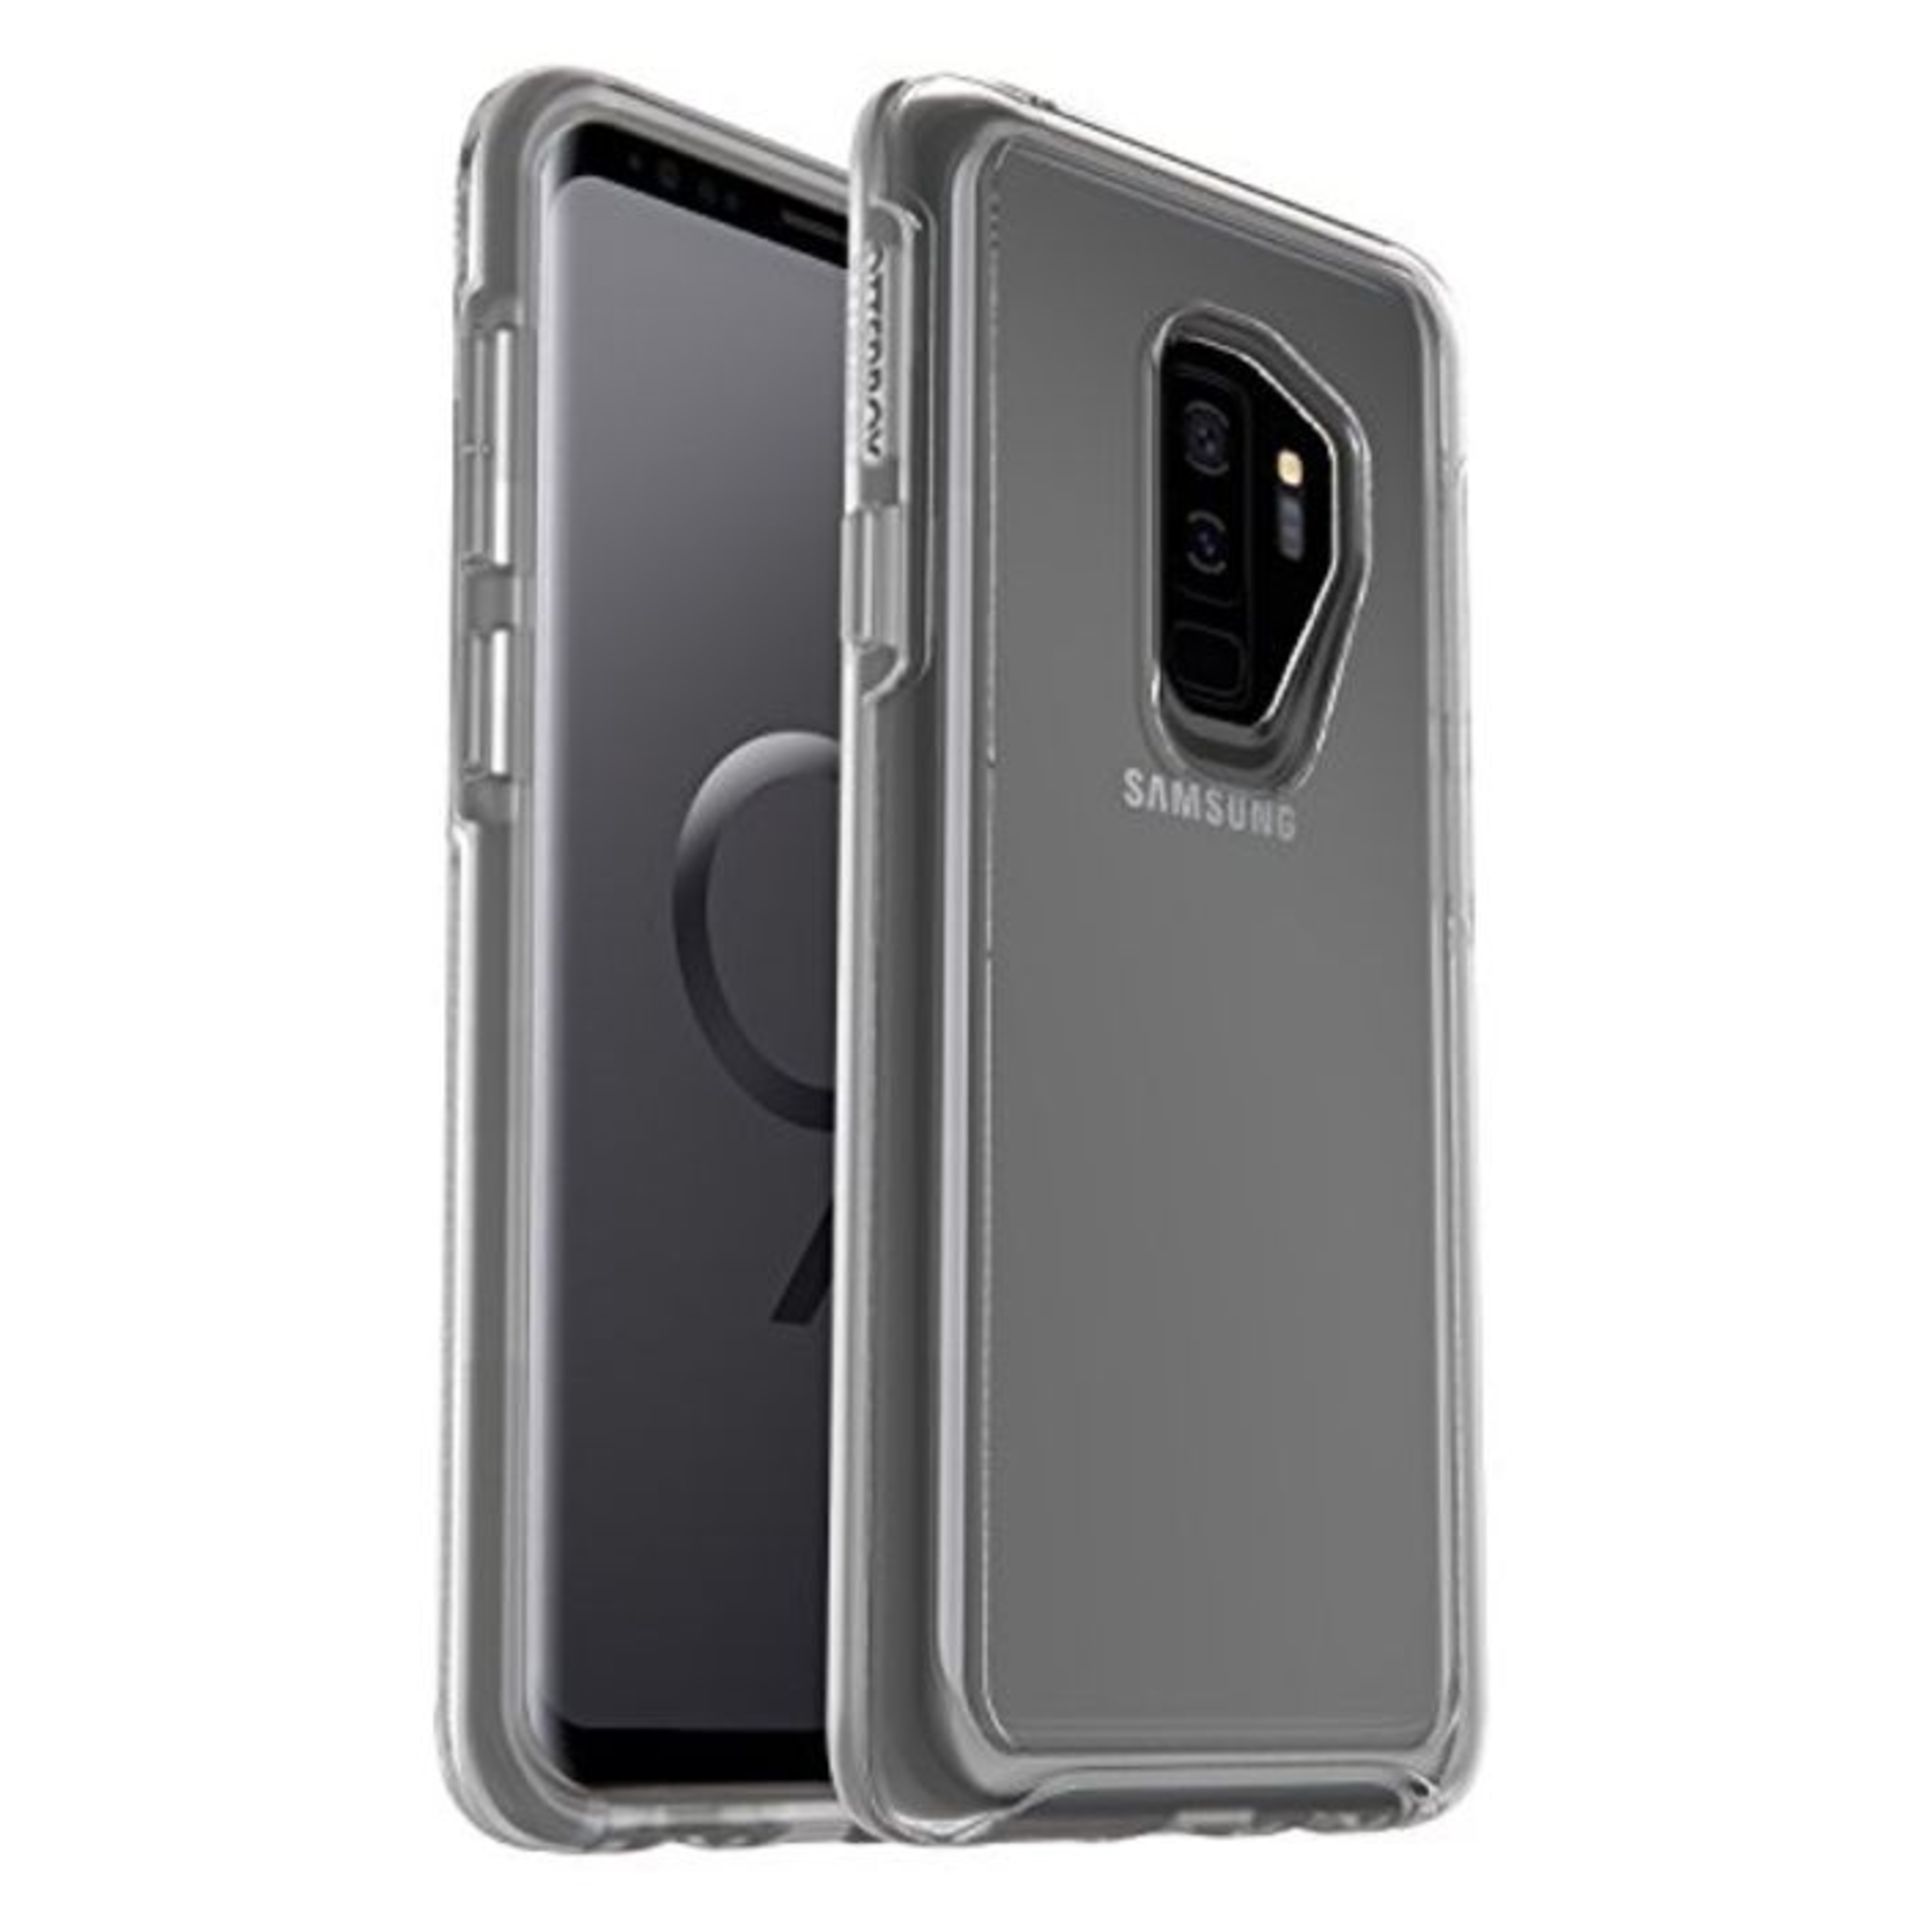 OtterBox for Samsung Galaxy S9+, Sleek Drop Proof Protective Clear Case, Symmetry Clea